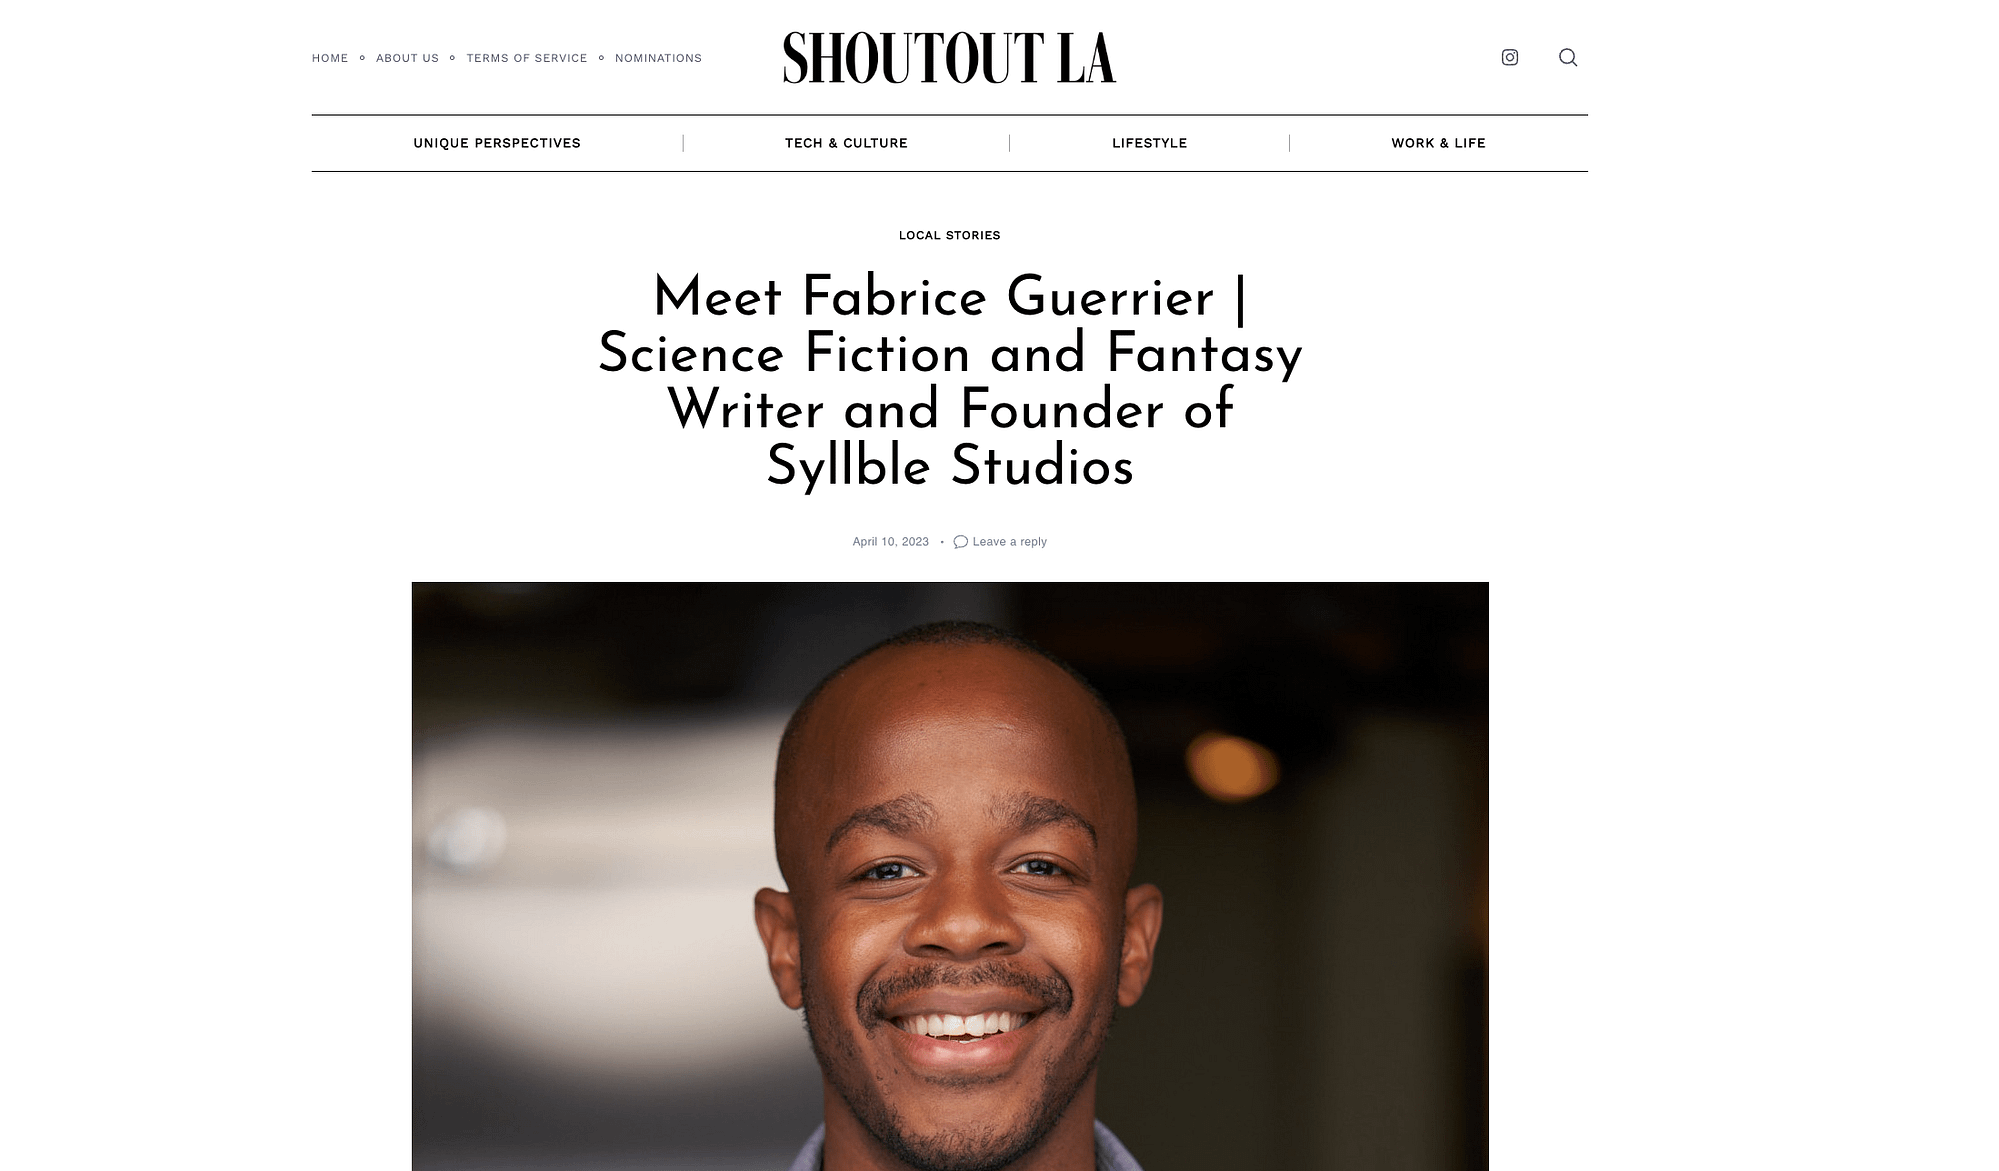 Meet Fabrice Guerrier | Science Fiction and Fantasy Writer and Founder of Syllble Studios